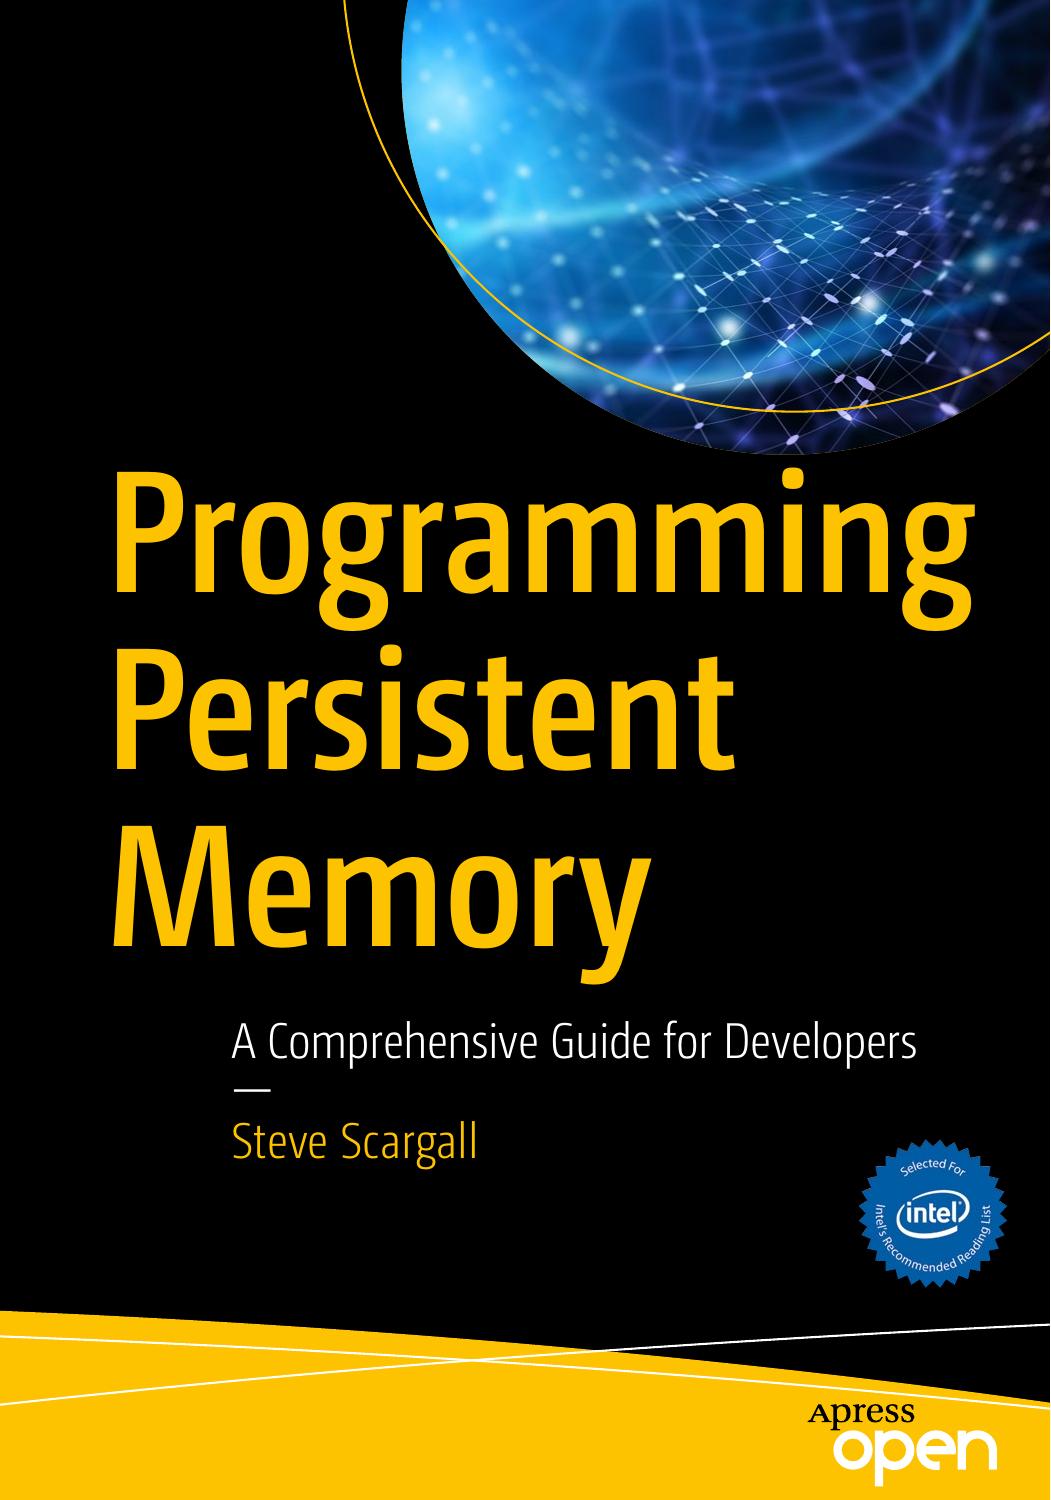 Programming Persistent Memory by Steve Scargall